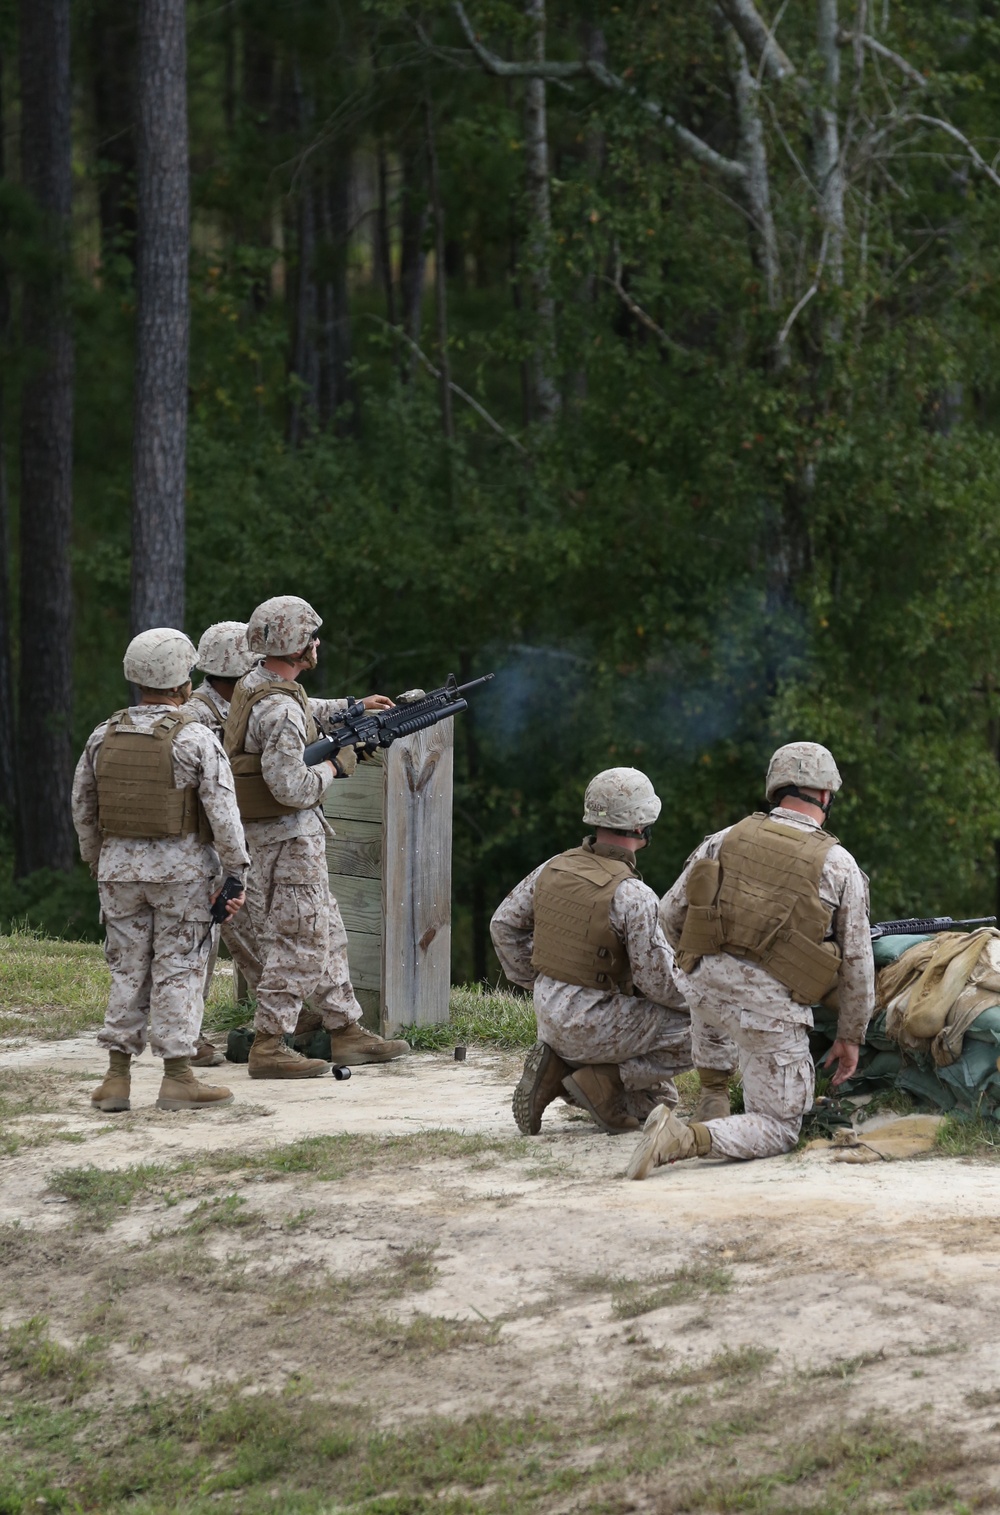 Rolling out the thunder: Bridge Co. trains with grenade systems